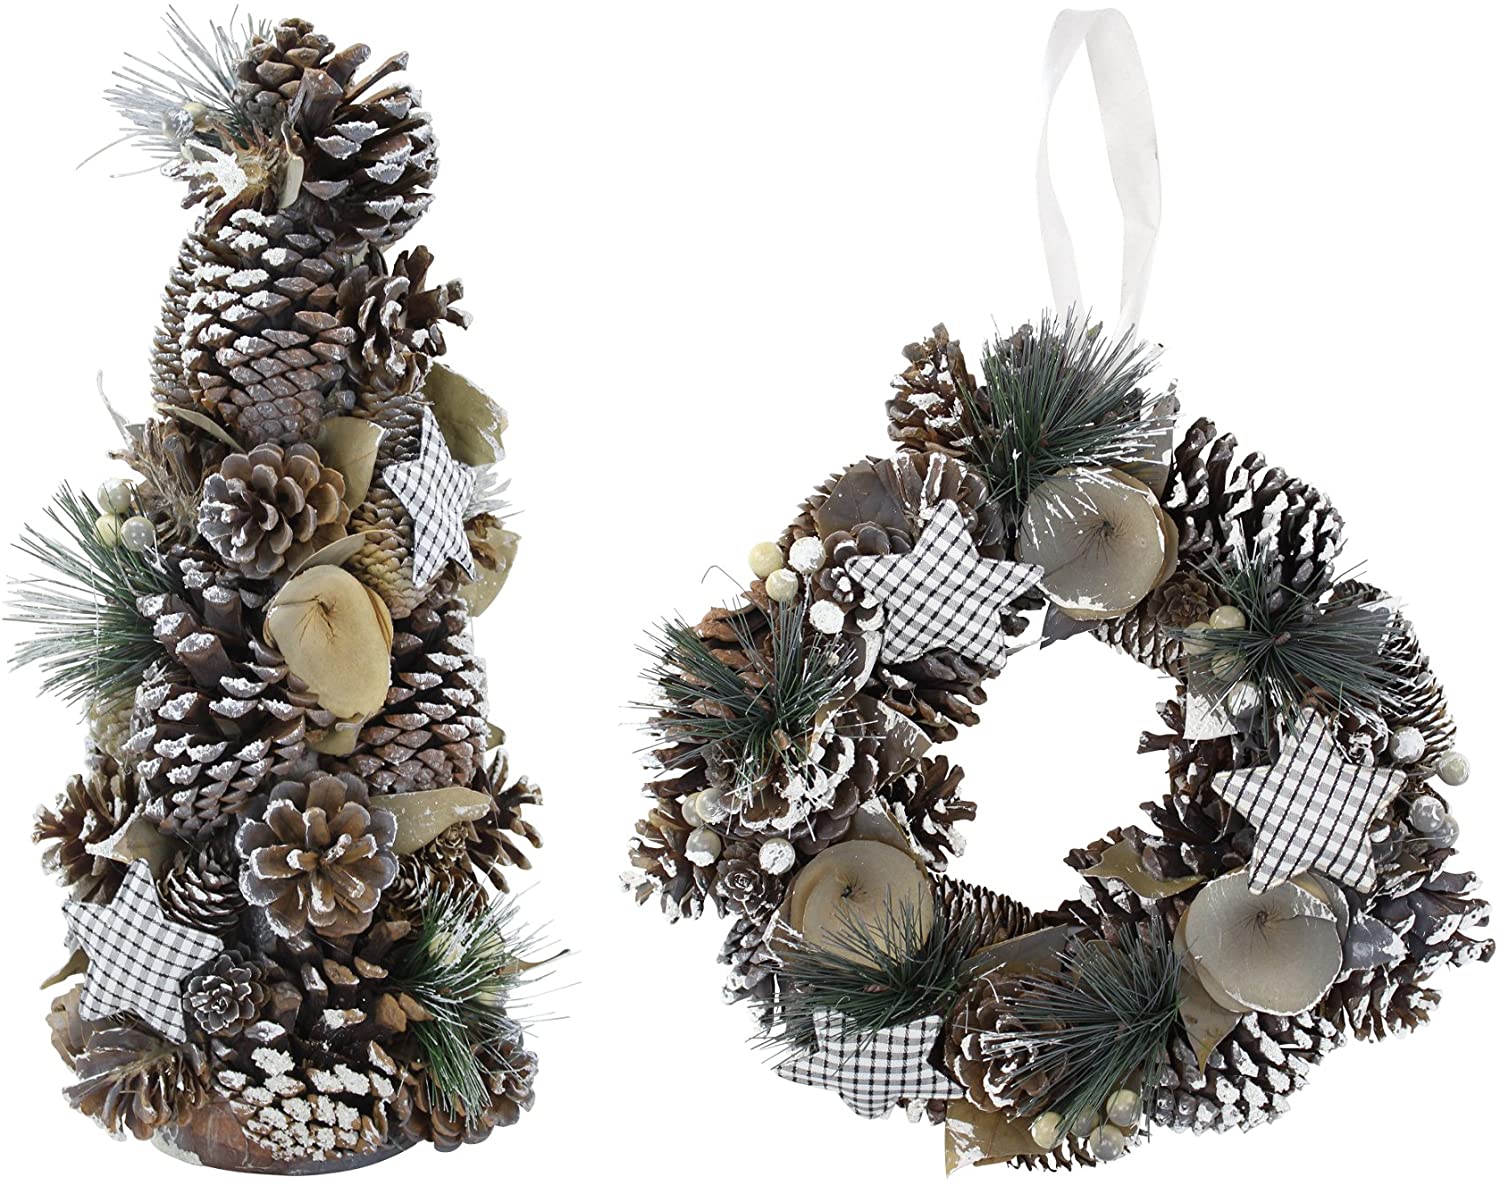 Decorative Wreathes And Trees